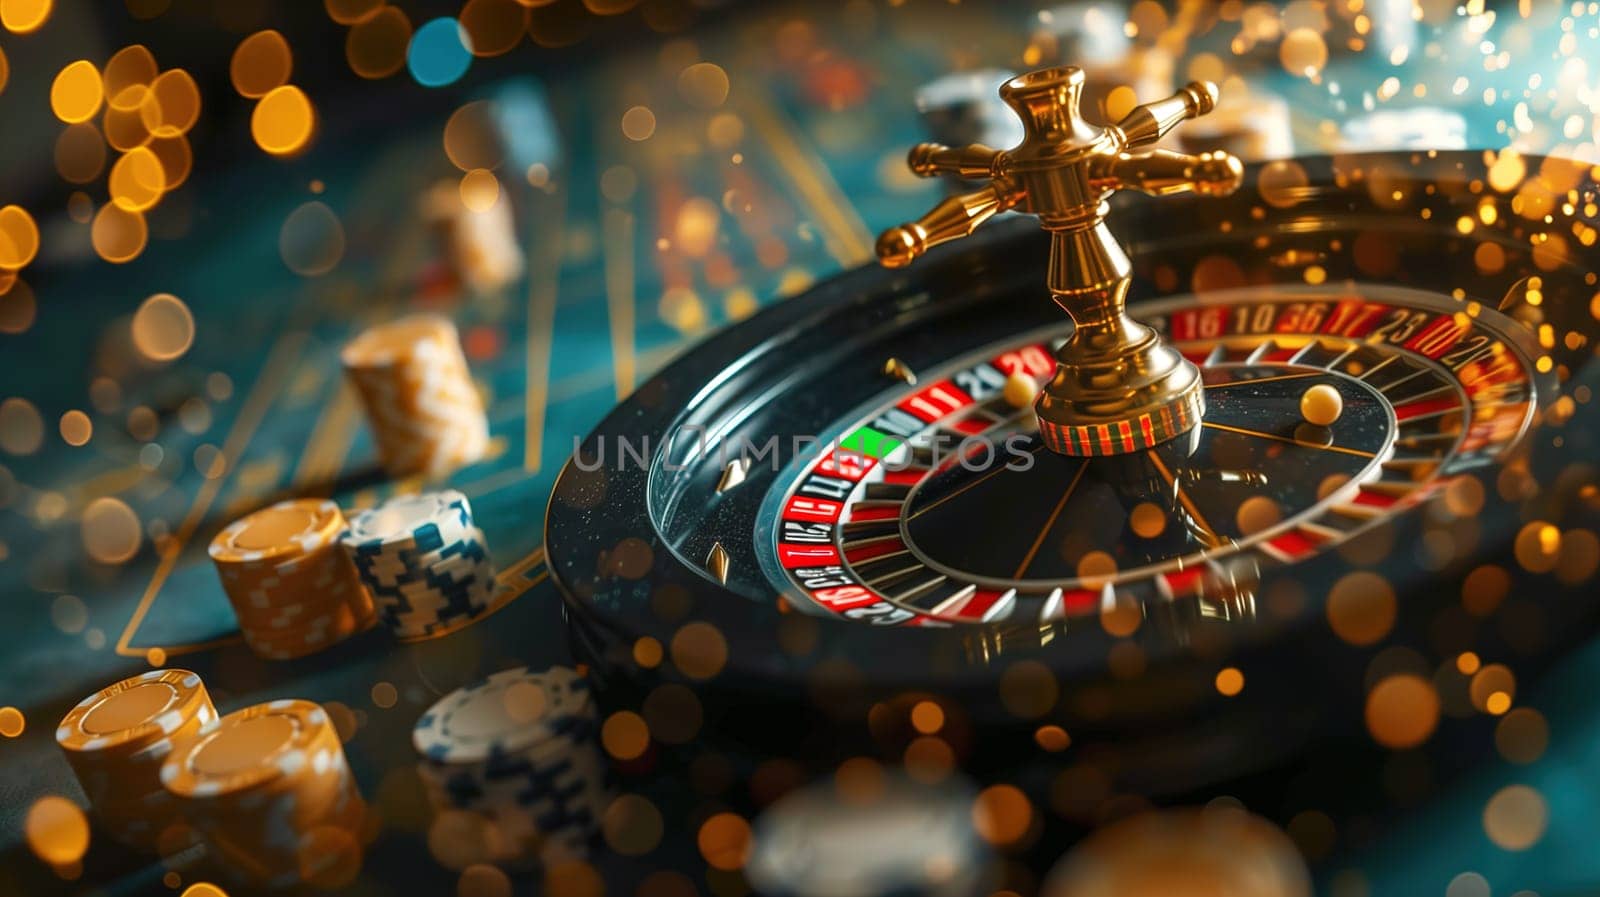 A close view captures the dynamic spin of a roulette wheel, its numbers blurring as the ball dances across the wheel, accompanied by the glint of gold chips in anticipation of a big win, encapsulating the excitement and luxury of a night at the casino.